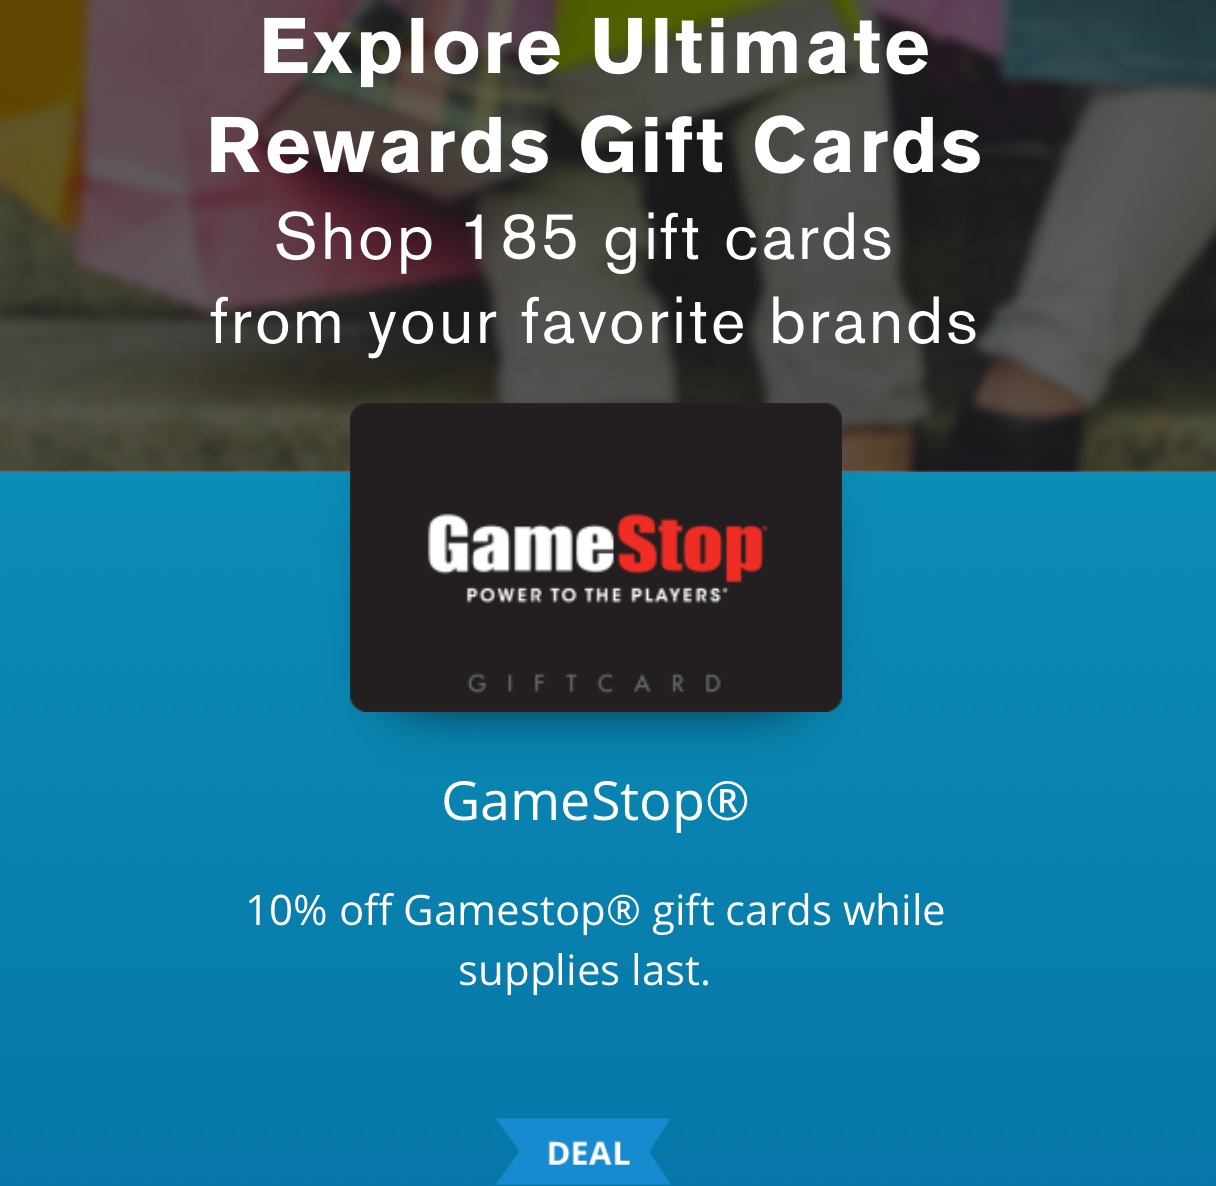 Chase Ultimate Rewards: Save 10% on Select Gift Card Redemptions (REI, GameStop, Home Depot*, American Eagle Outfitters, Sephora, Yankee Candle, Spotify, Regal Cinemas and More)